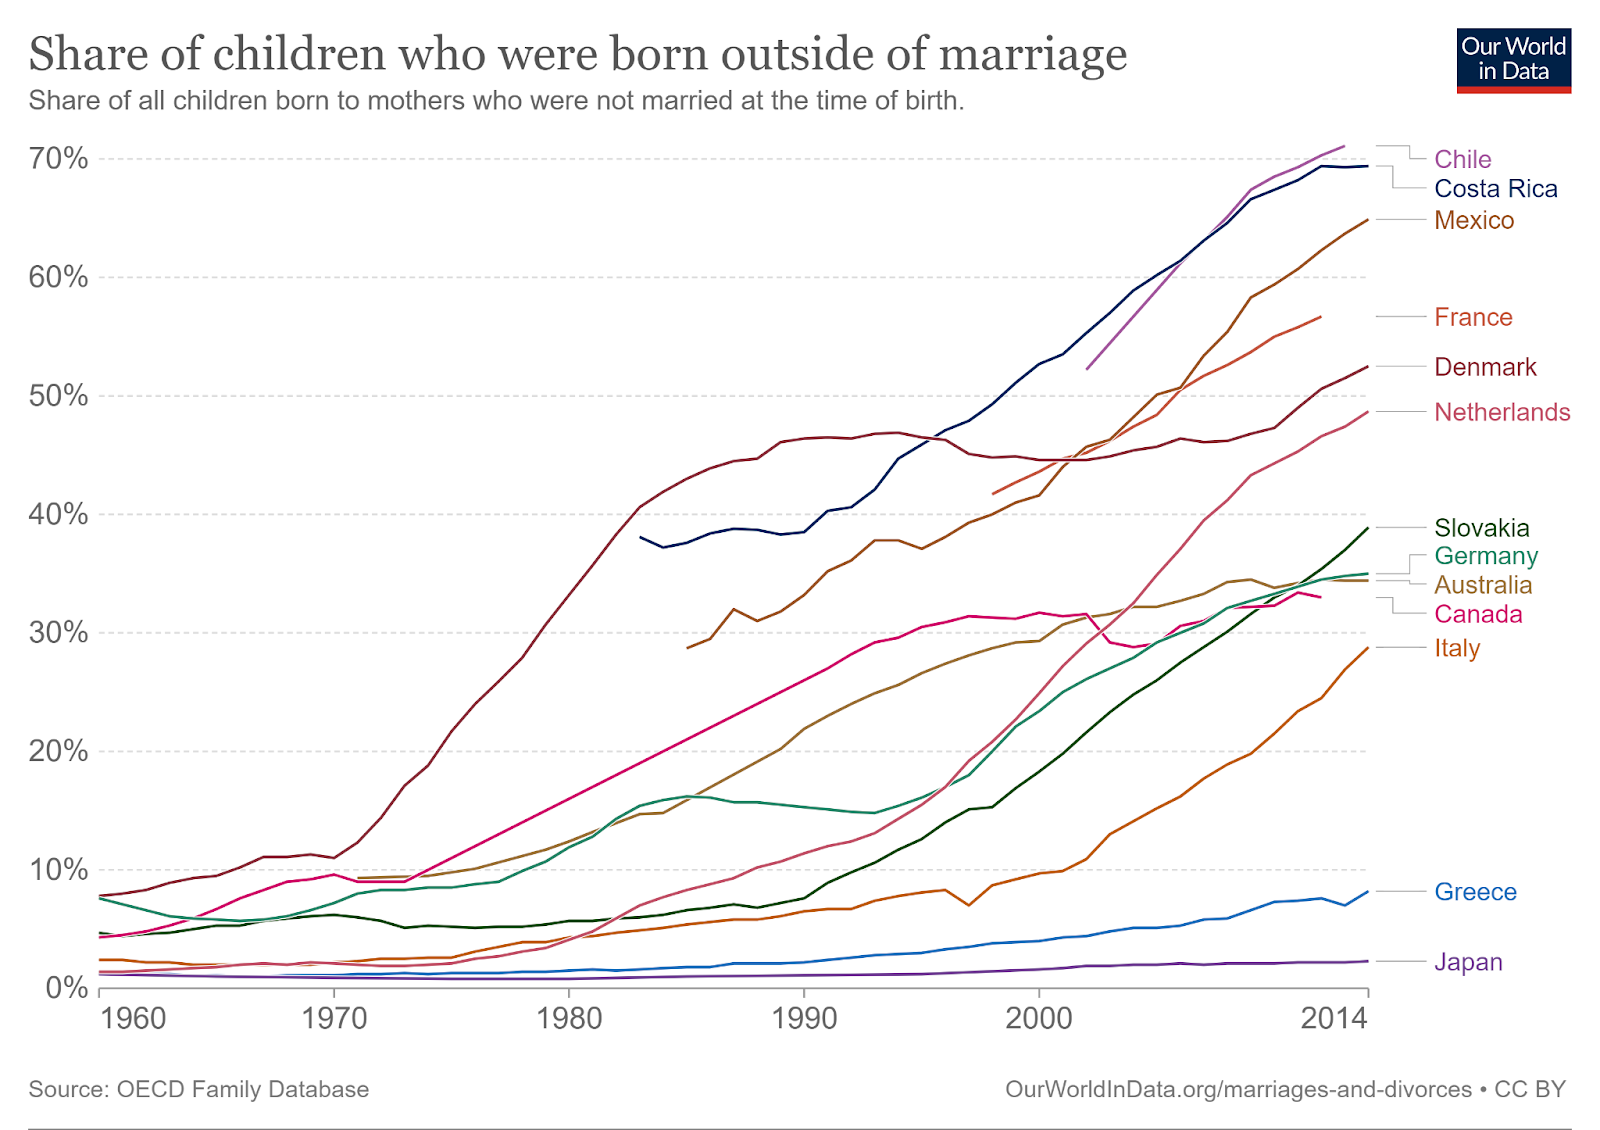 External image of a graph showing “Share of children who were born outside of marriage”. Text under title says: “Share of all children born to mothers who were not married at the time of birth”. The Y-axis shows percentage and the X-axis shows the years between 1960 and 2014. Chile’s graph began in 2002 at 53%, had a constant increase and ended at 72% in 2012. Costa Rica’s graph began in 1983 at 38%, had a constant increase and ended at 69% in 2014. Mexico’s graph began in 1985 at 29%, had a constant increase and ended at 65% in 2014. France’s graph began in 1997 at 42%, had a constant increase and ended at 56% in 2012. Denmark’s graph began in 1960 at 8%, had a constant increase and ended at 53% in 2014. Netherland’s graph began in 1960 at 2%, had a constant increase and ended at 49% in 2014. Slovakia’s graph began in 1960 at 5%, had a constant increase and ended at 39% in 2014. Germany’s graph began in 1960 at 8%, had a constant increase and ended at 35% in 2014. Australia’s graph began in 1971 at 9%, had a constant increase and ended at 35% in 2014. Canada’s graph began in 1960 at 5%, had a constant increase and ended at 33% in 2012. Italy’s graph began in 1960 at 3%, had a constant increase and ended at 29% in 2014. Greece’s graph began in 1960 at 2%, had a constant increase and ended at 8% in 2014. Japan’s graph began in 1960 at 2%, had a constant increase and ended at 3% in 2014. The source for this data is: OECD Family Database. OurWorldInData.org/marriages-and-divorces. CC BY.